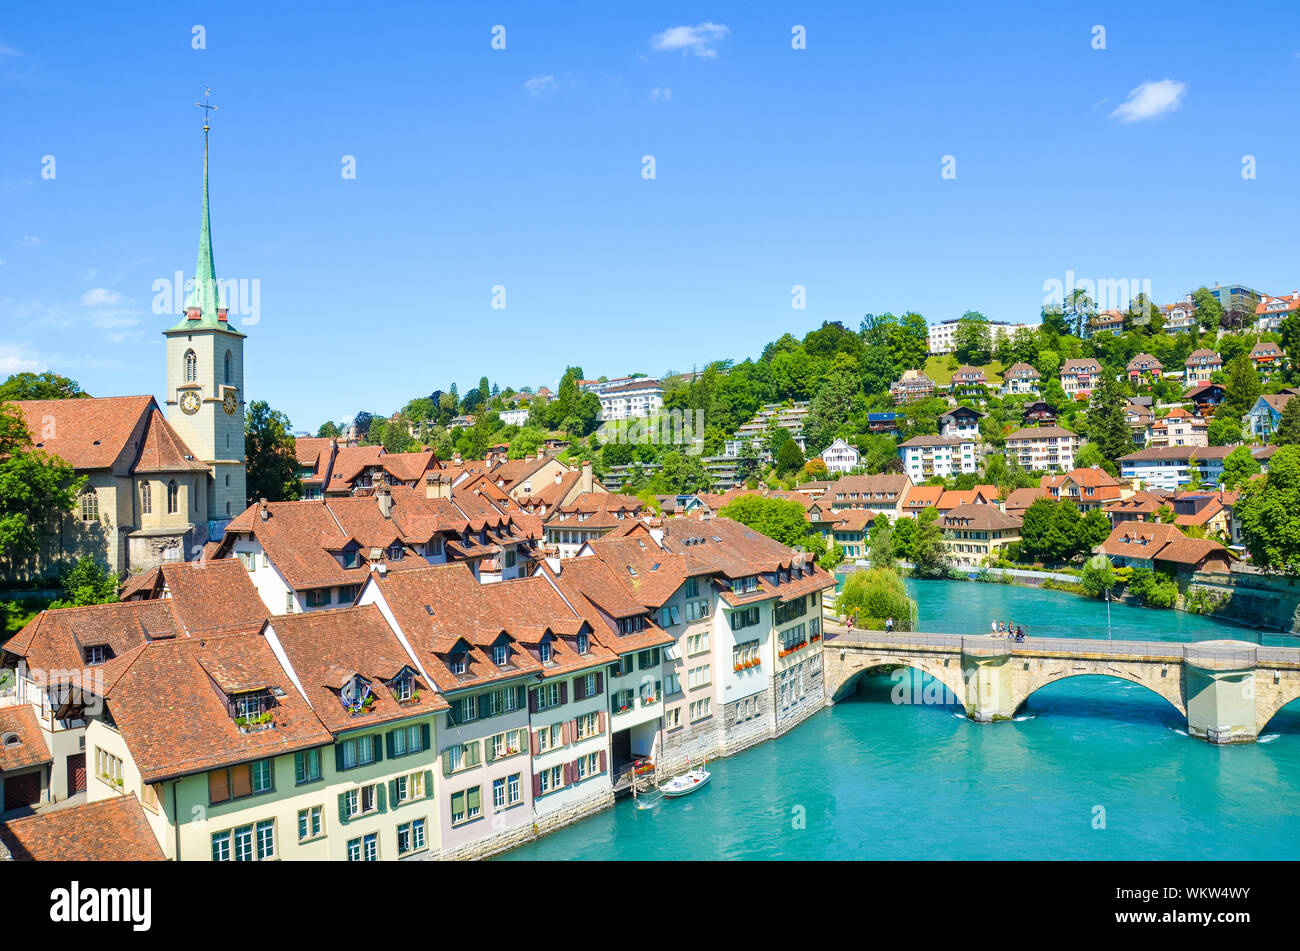 Bern, the capital of Switzerland, with dominant Nydegg Church and historical center located along turquoise Aare River. Bridge over Aare. Tourist destination, local attraction. Swiss city. Stock Photo